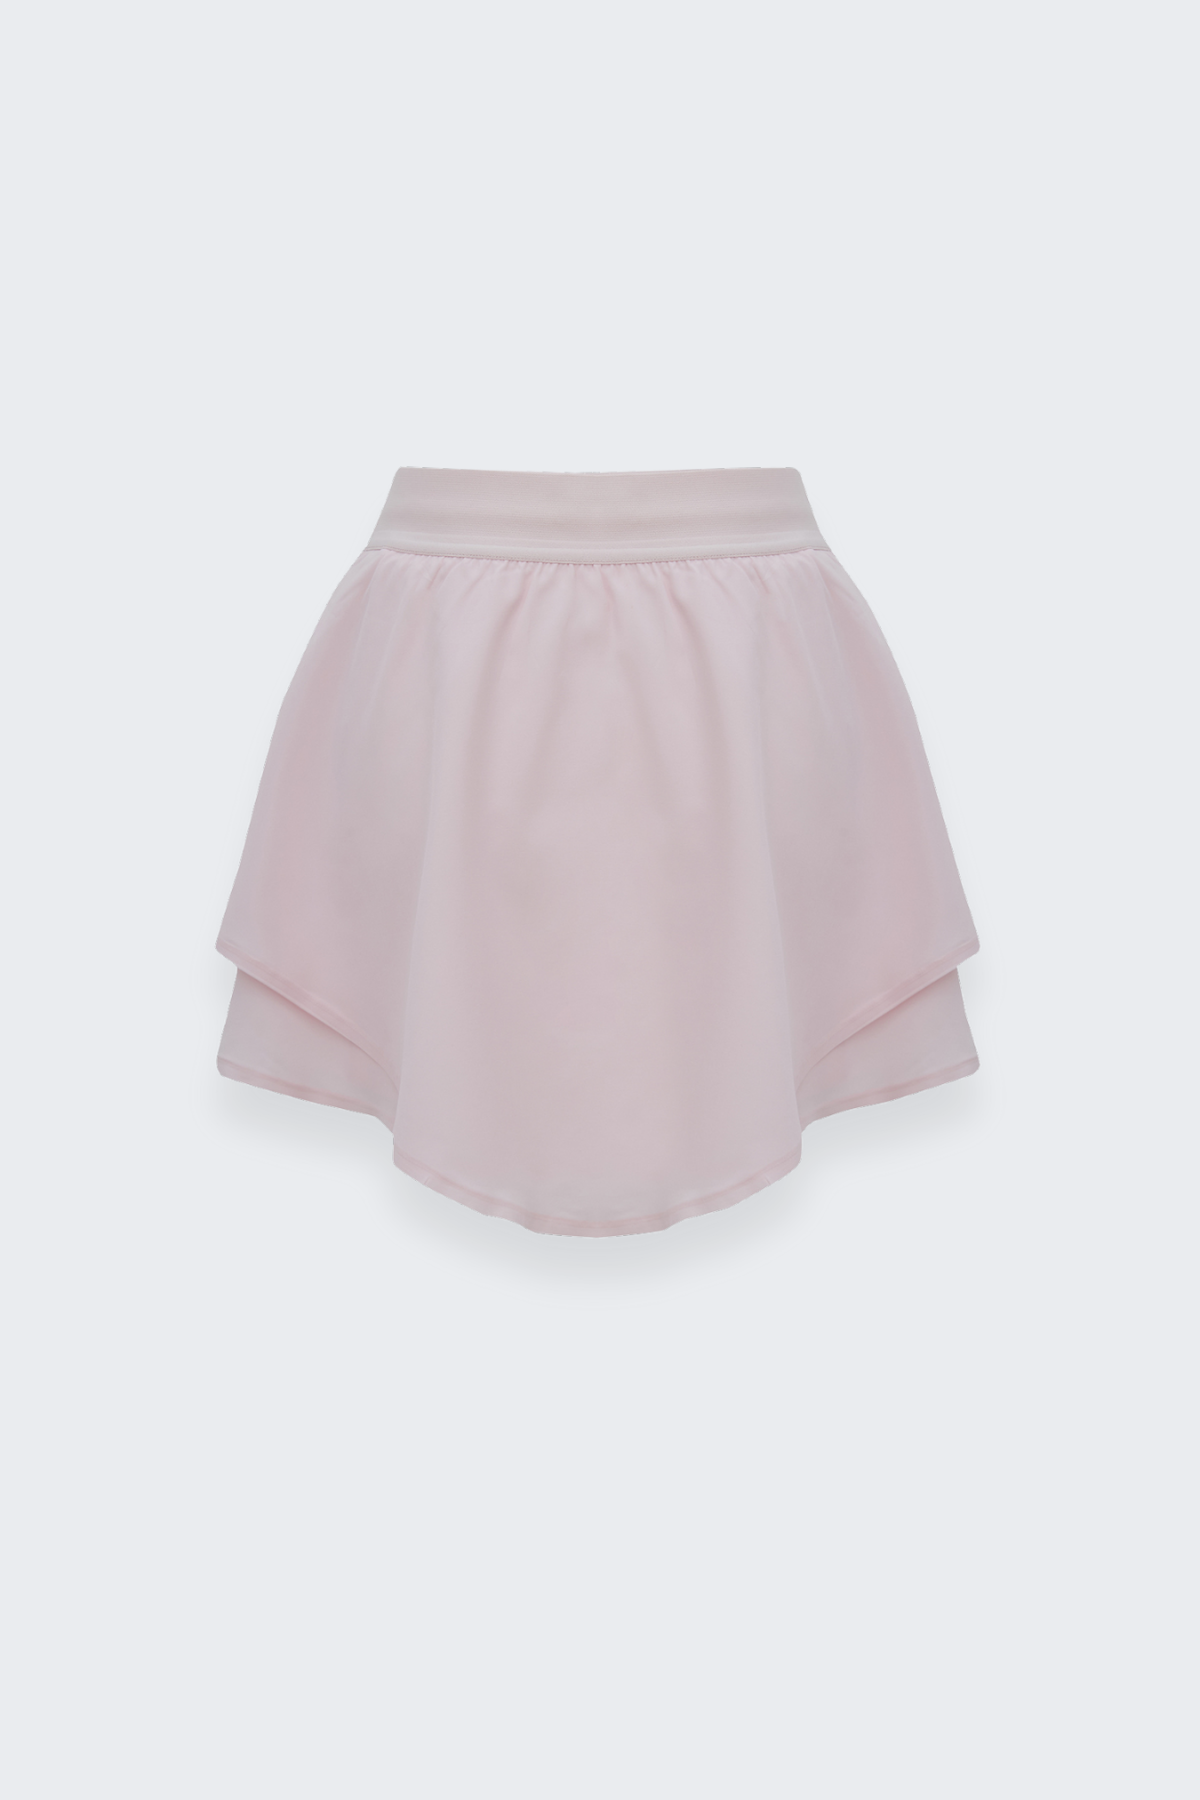 Amuse Skirt in Pink